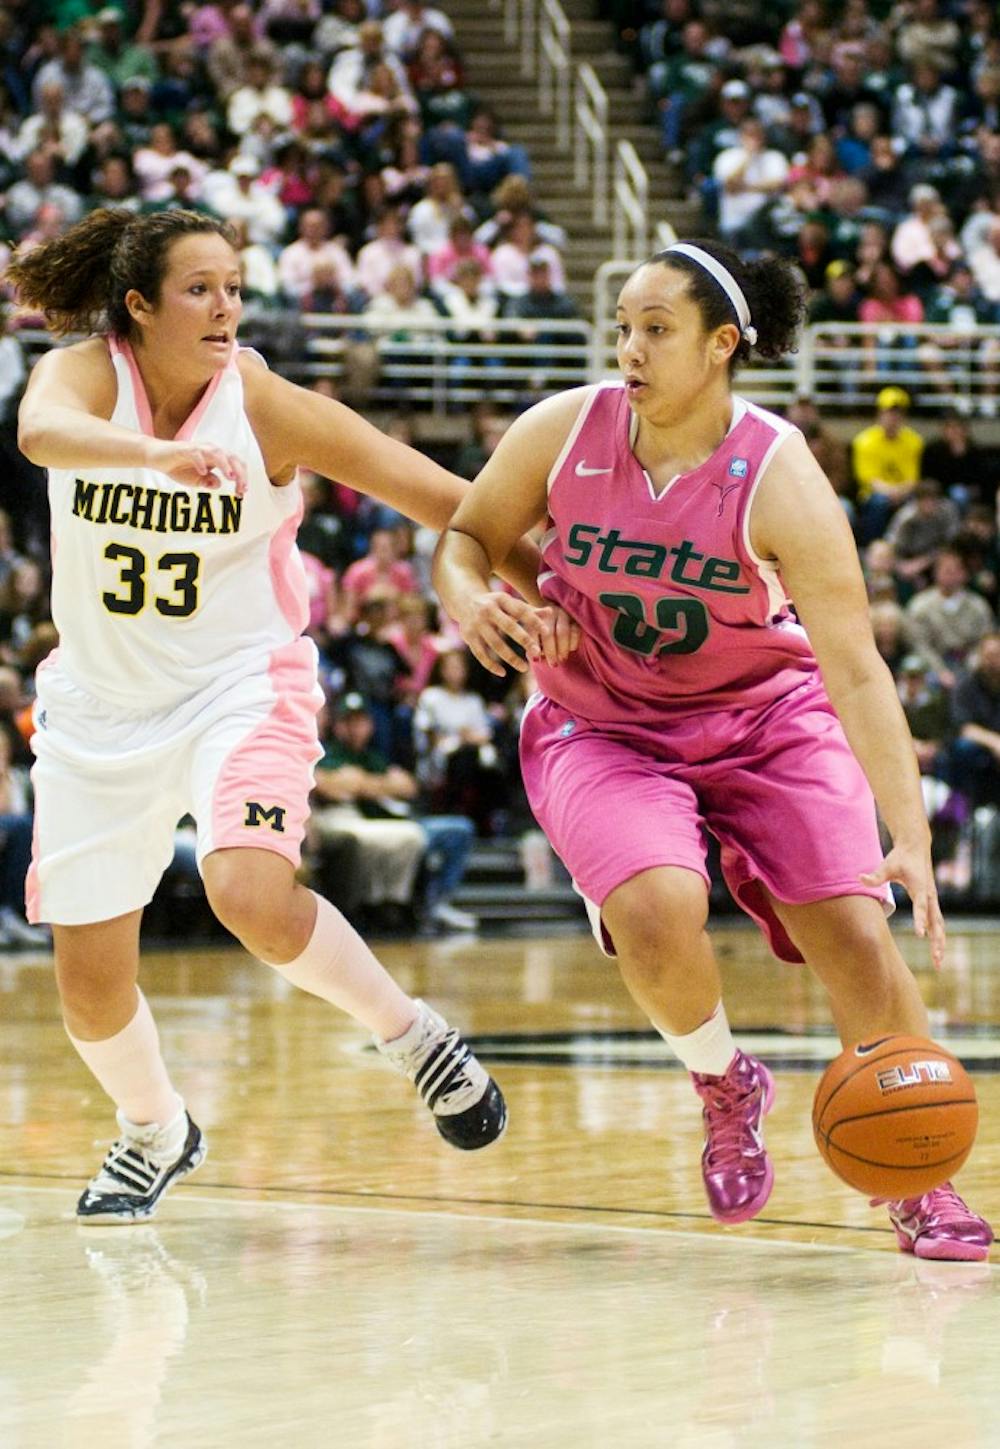 Senior forward Kalisha Keane works her way around Michigan guard Carmen Reynolds Sunday afternoon at Breslin Center. Keane put up 18 points for the Spartans, helping them to defeat the Wolverines 69-56 in the first sold out game in MSU Women's Basketball history. Matt Hallowell/The State News